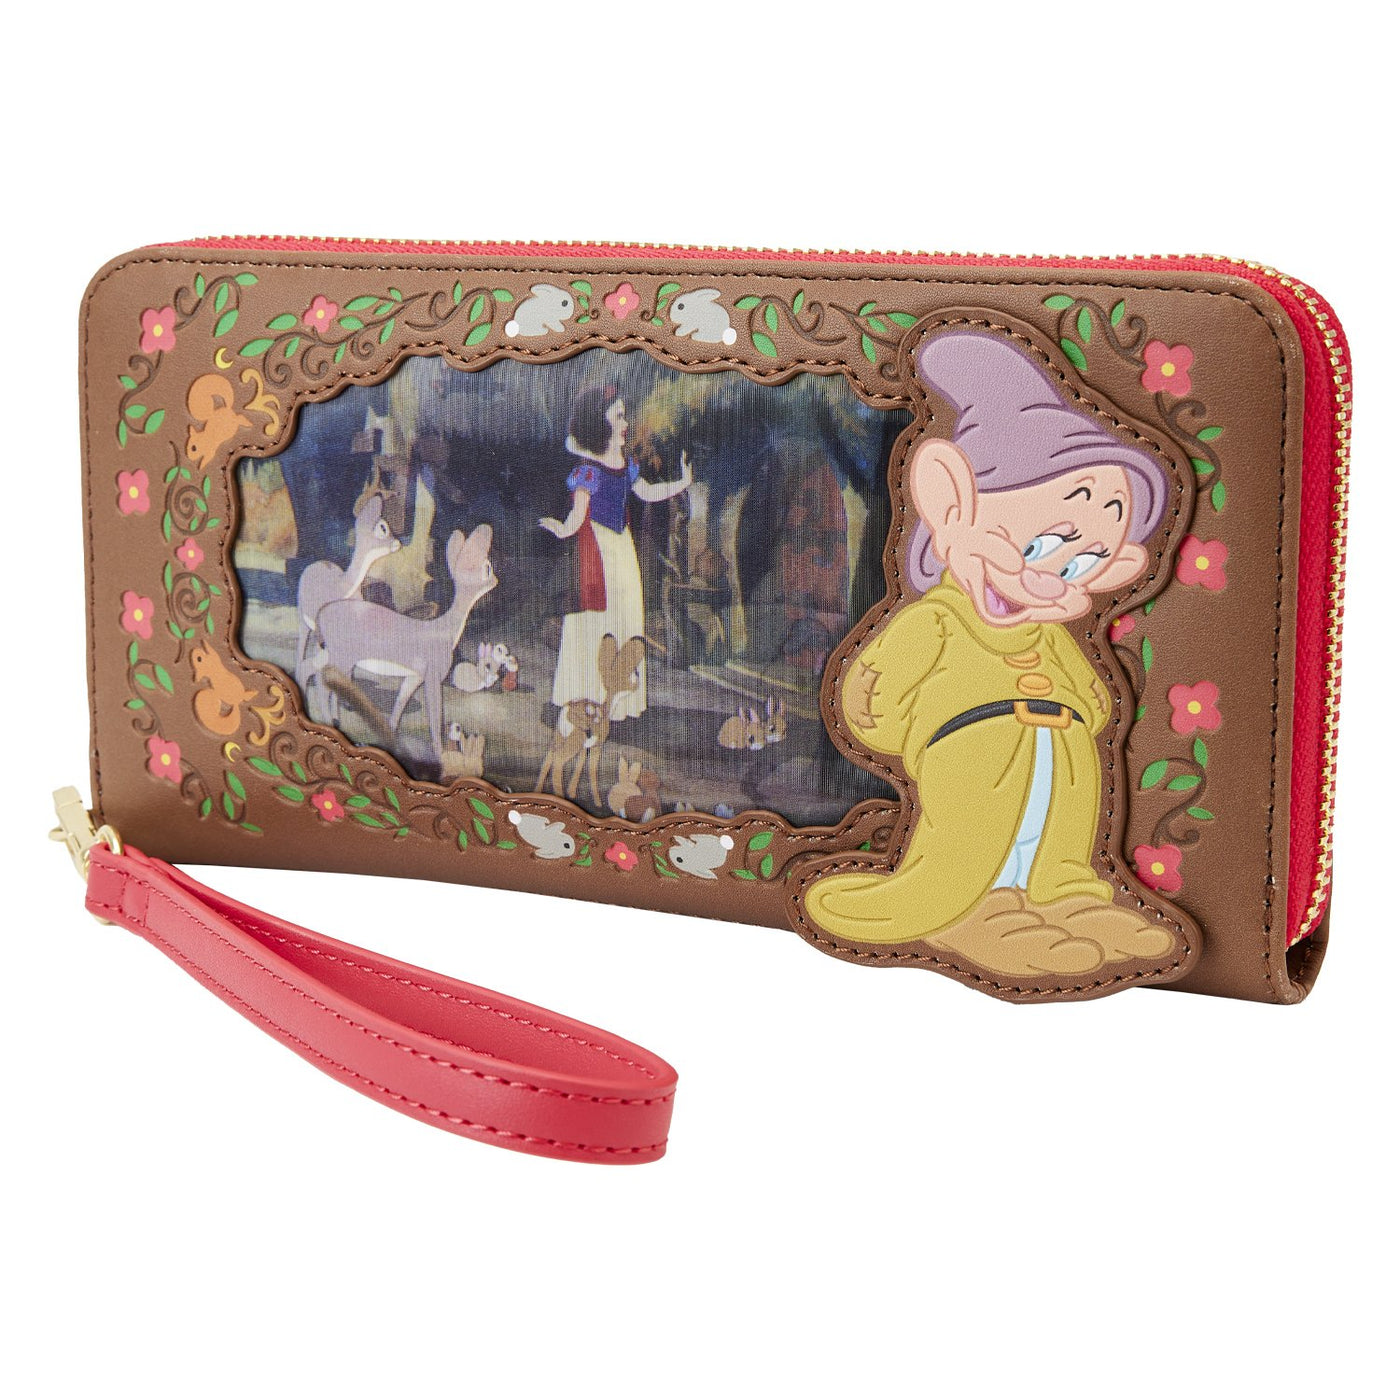 Buy Snow White Princess Sequin Series Flap Wallet at Loungefly.